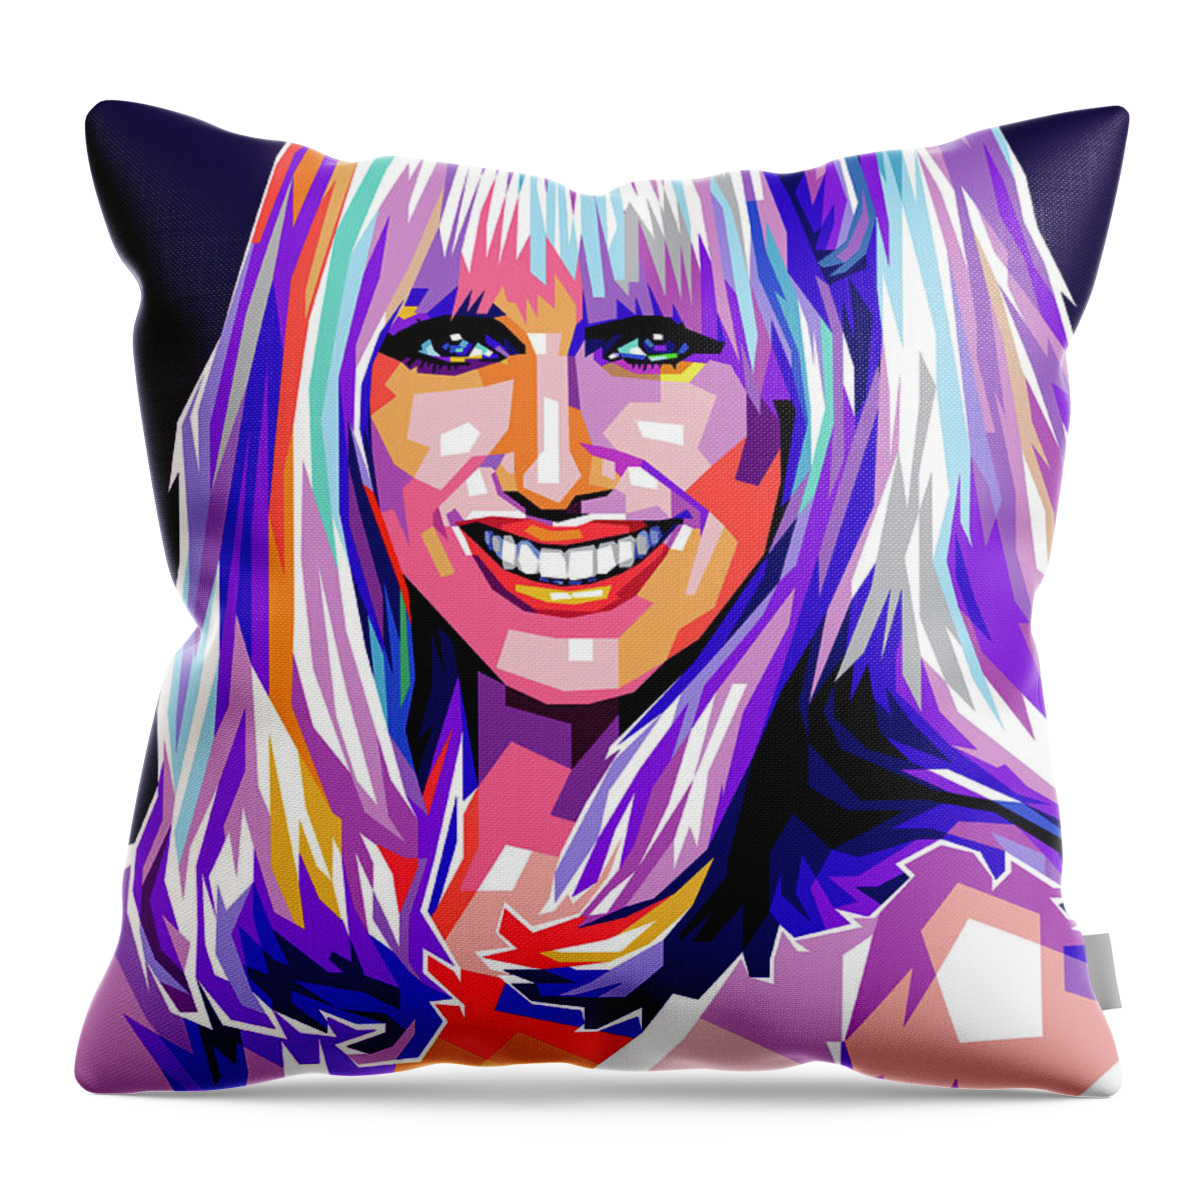 Suzanne Throw Pillow featuring the digital art Suzanne Somers pop art by Stars on Art